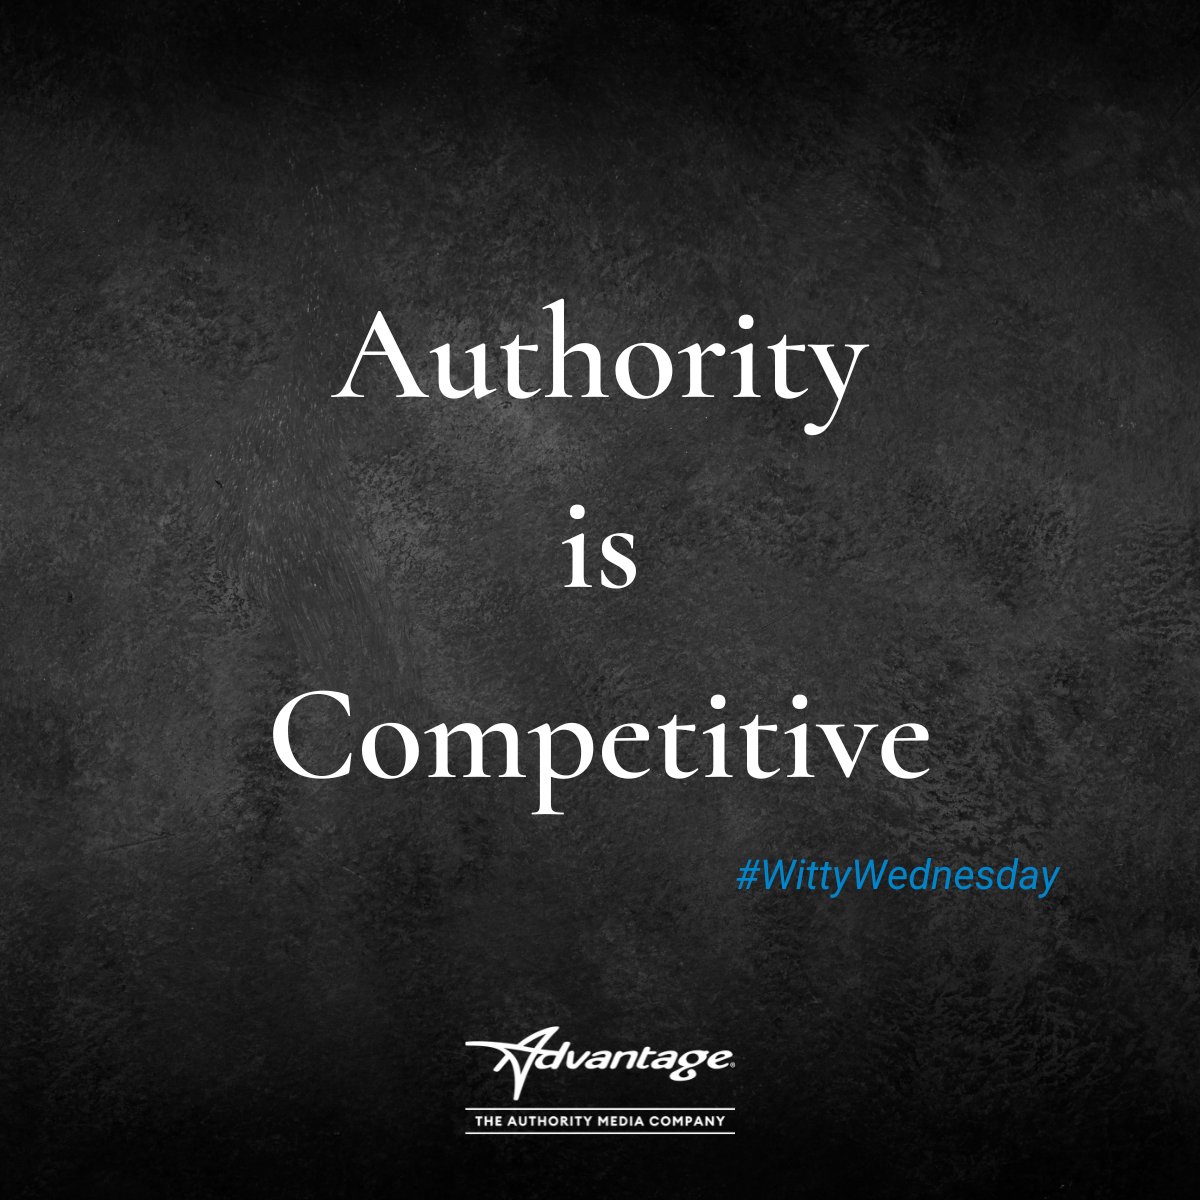 'Individual brands have become an increasingly sought-after competitive advantage' - Adam Witty, CEO, Forbes Books and Advantage Media. What is the foundation of this level of Authority? TRUST! Who is a fellow thought leader you trust? Tag them below! #WittyWednesday